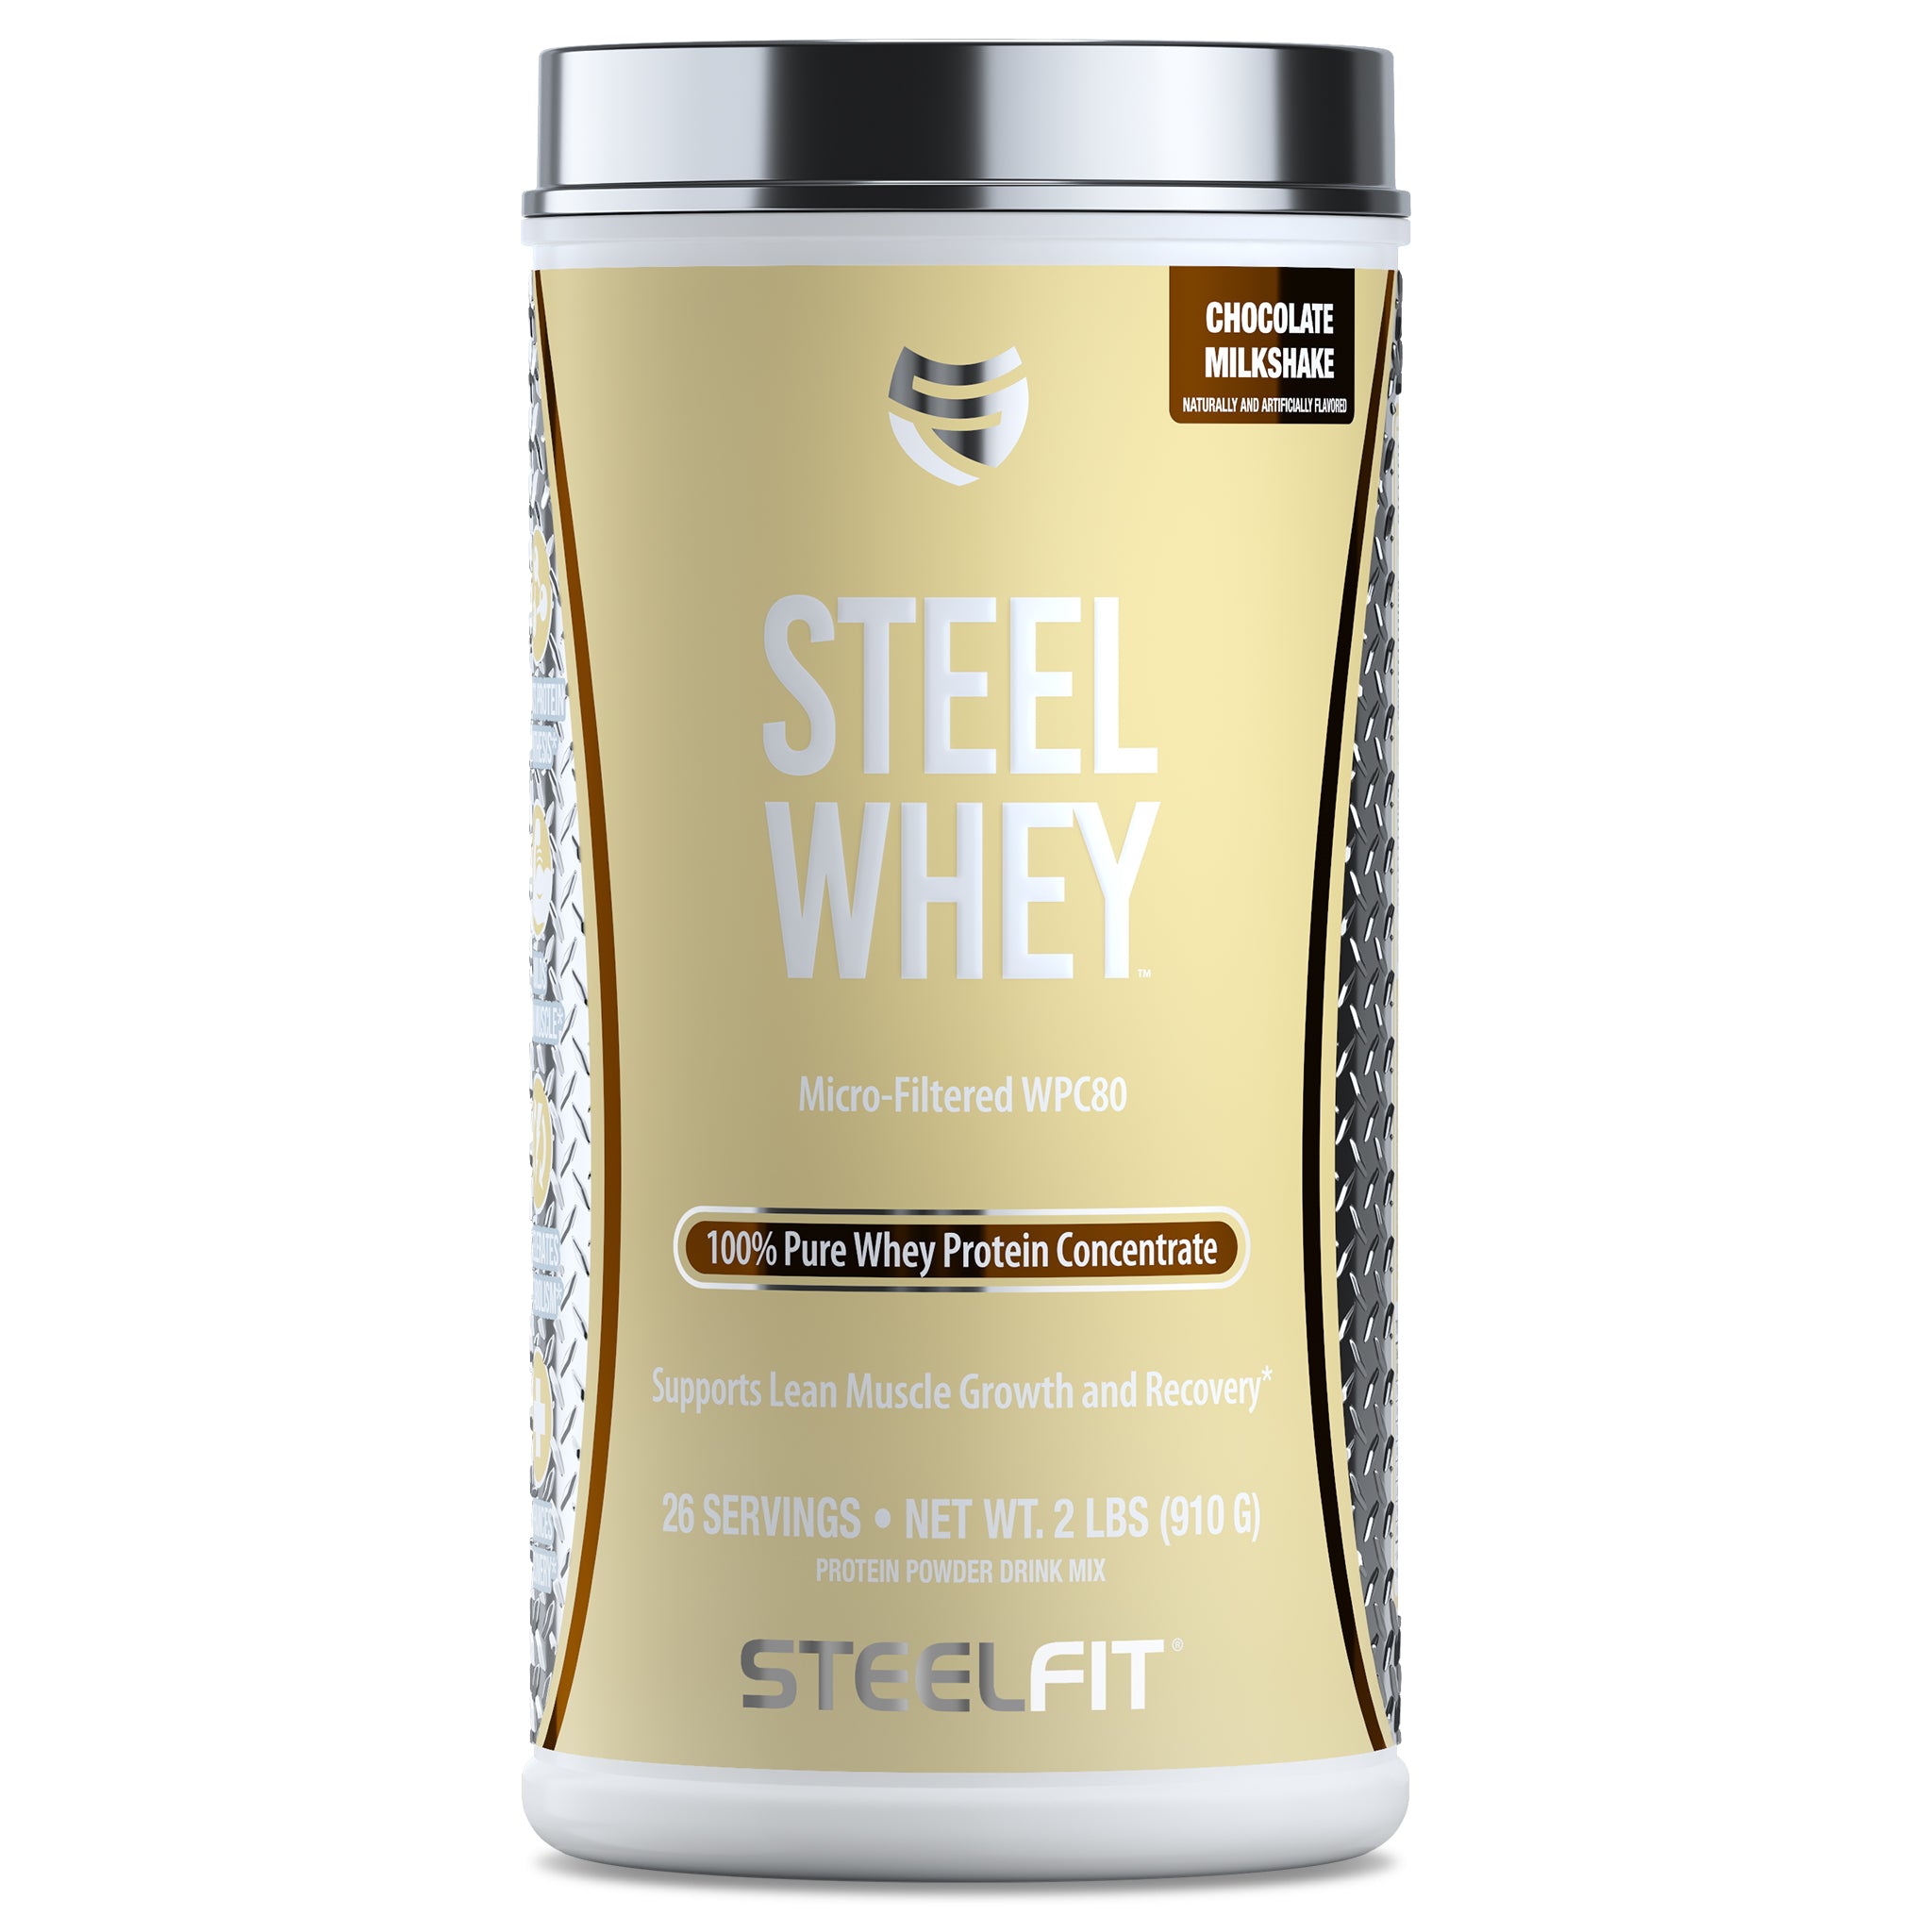 whey protein for muscle, whey protein supplement, whey protein concentrate